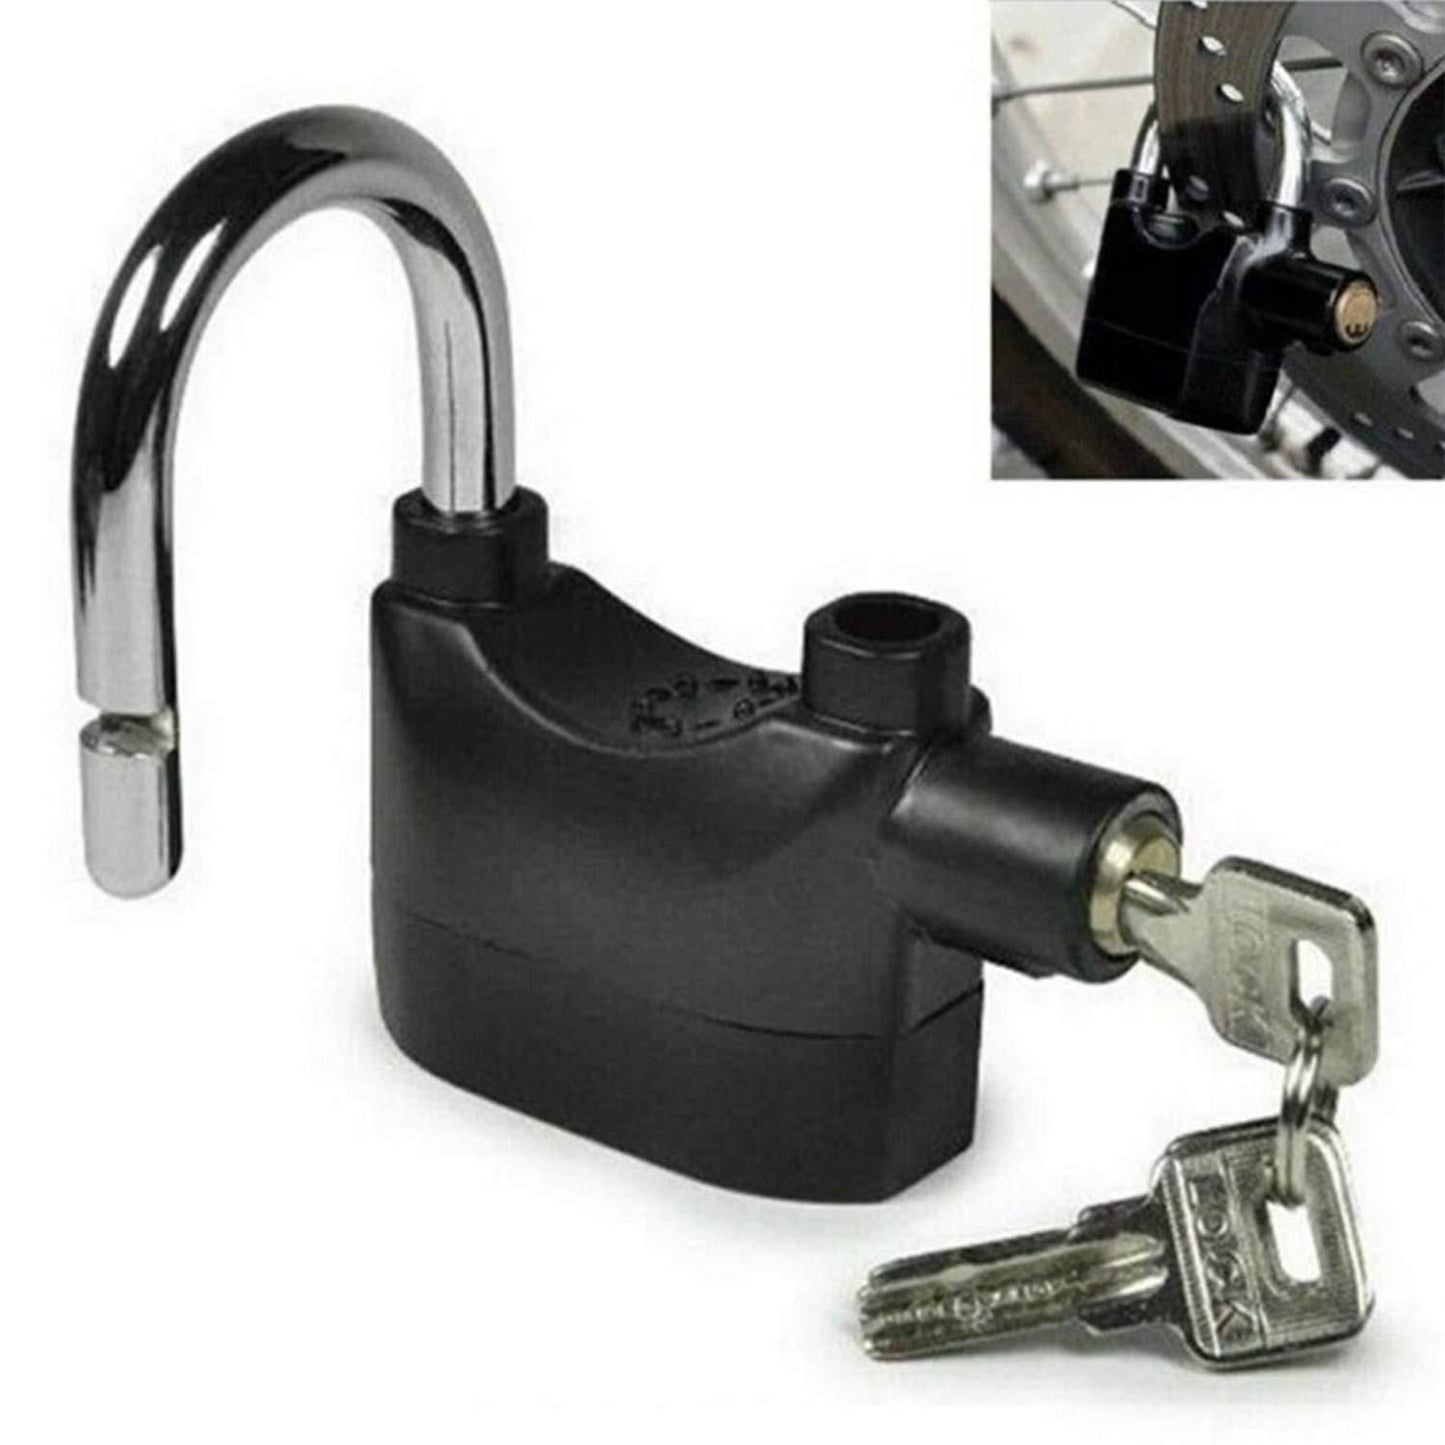 Anti-Theft Lock - Security Padlock with Alarm Siren and Motion Sensor for Home Security